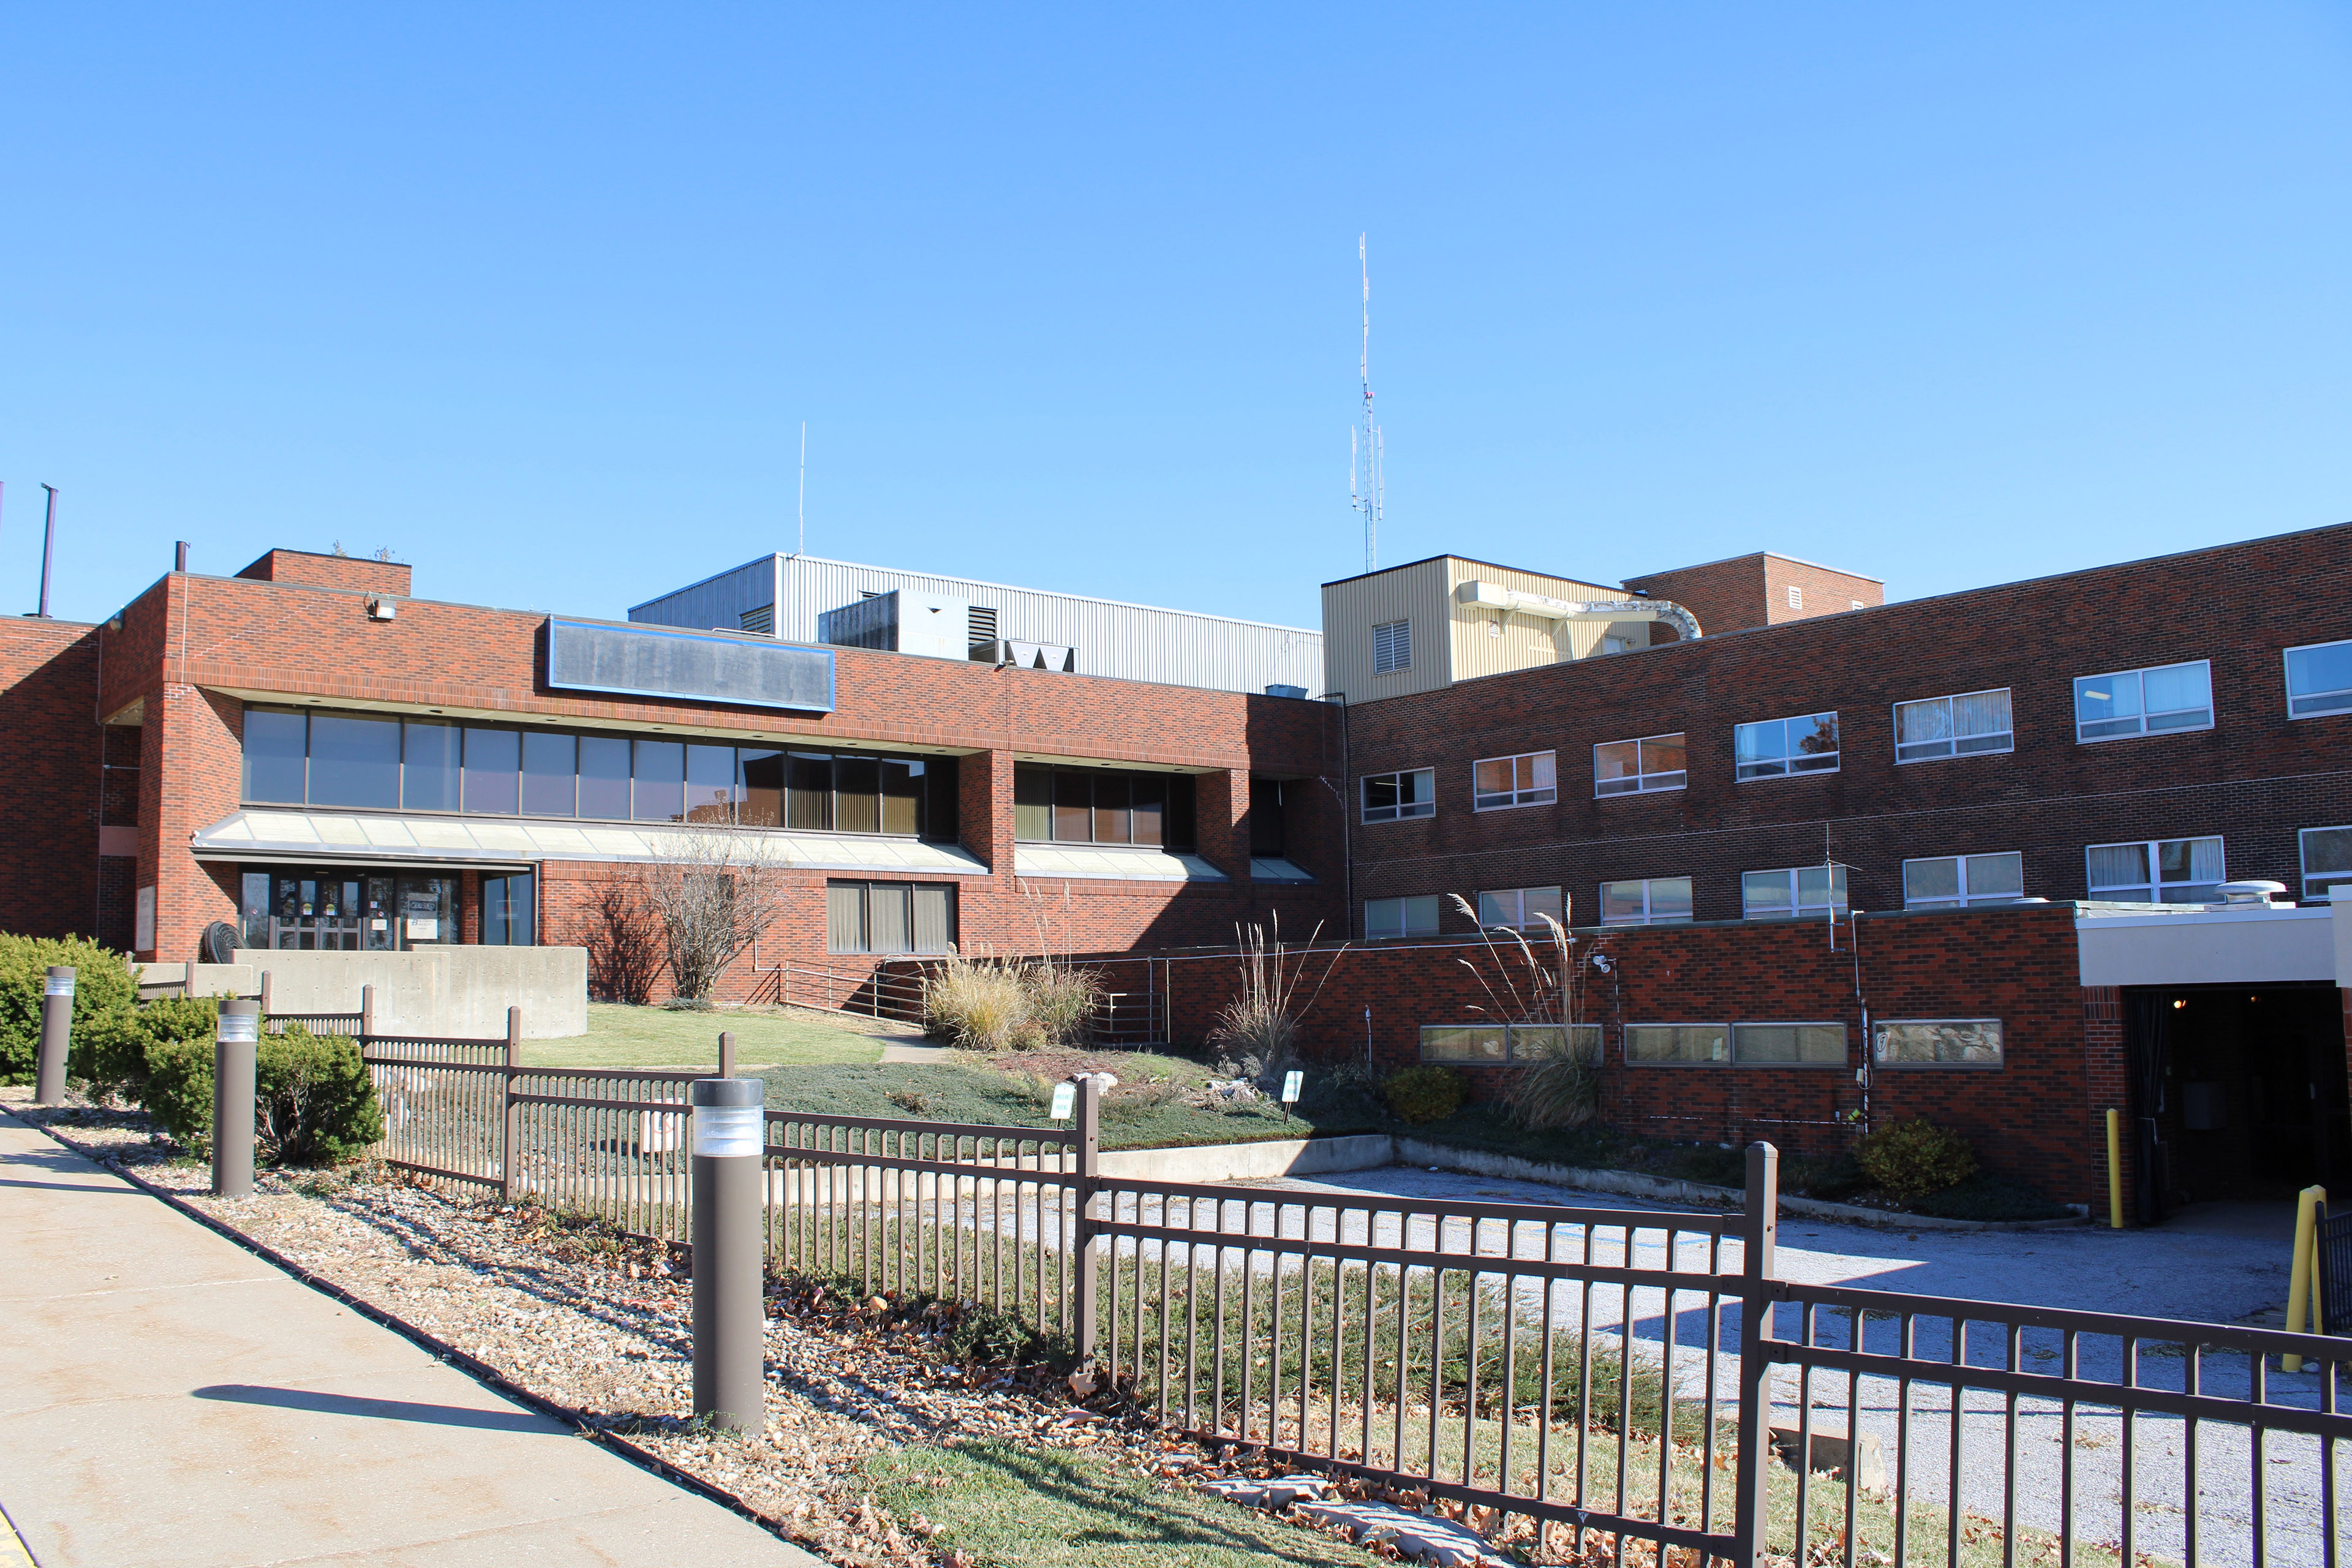 An exterior shot of the Keokuk Area Hospital. It is a 2 to 3 story brick building.